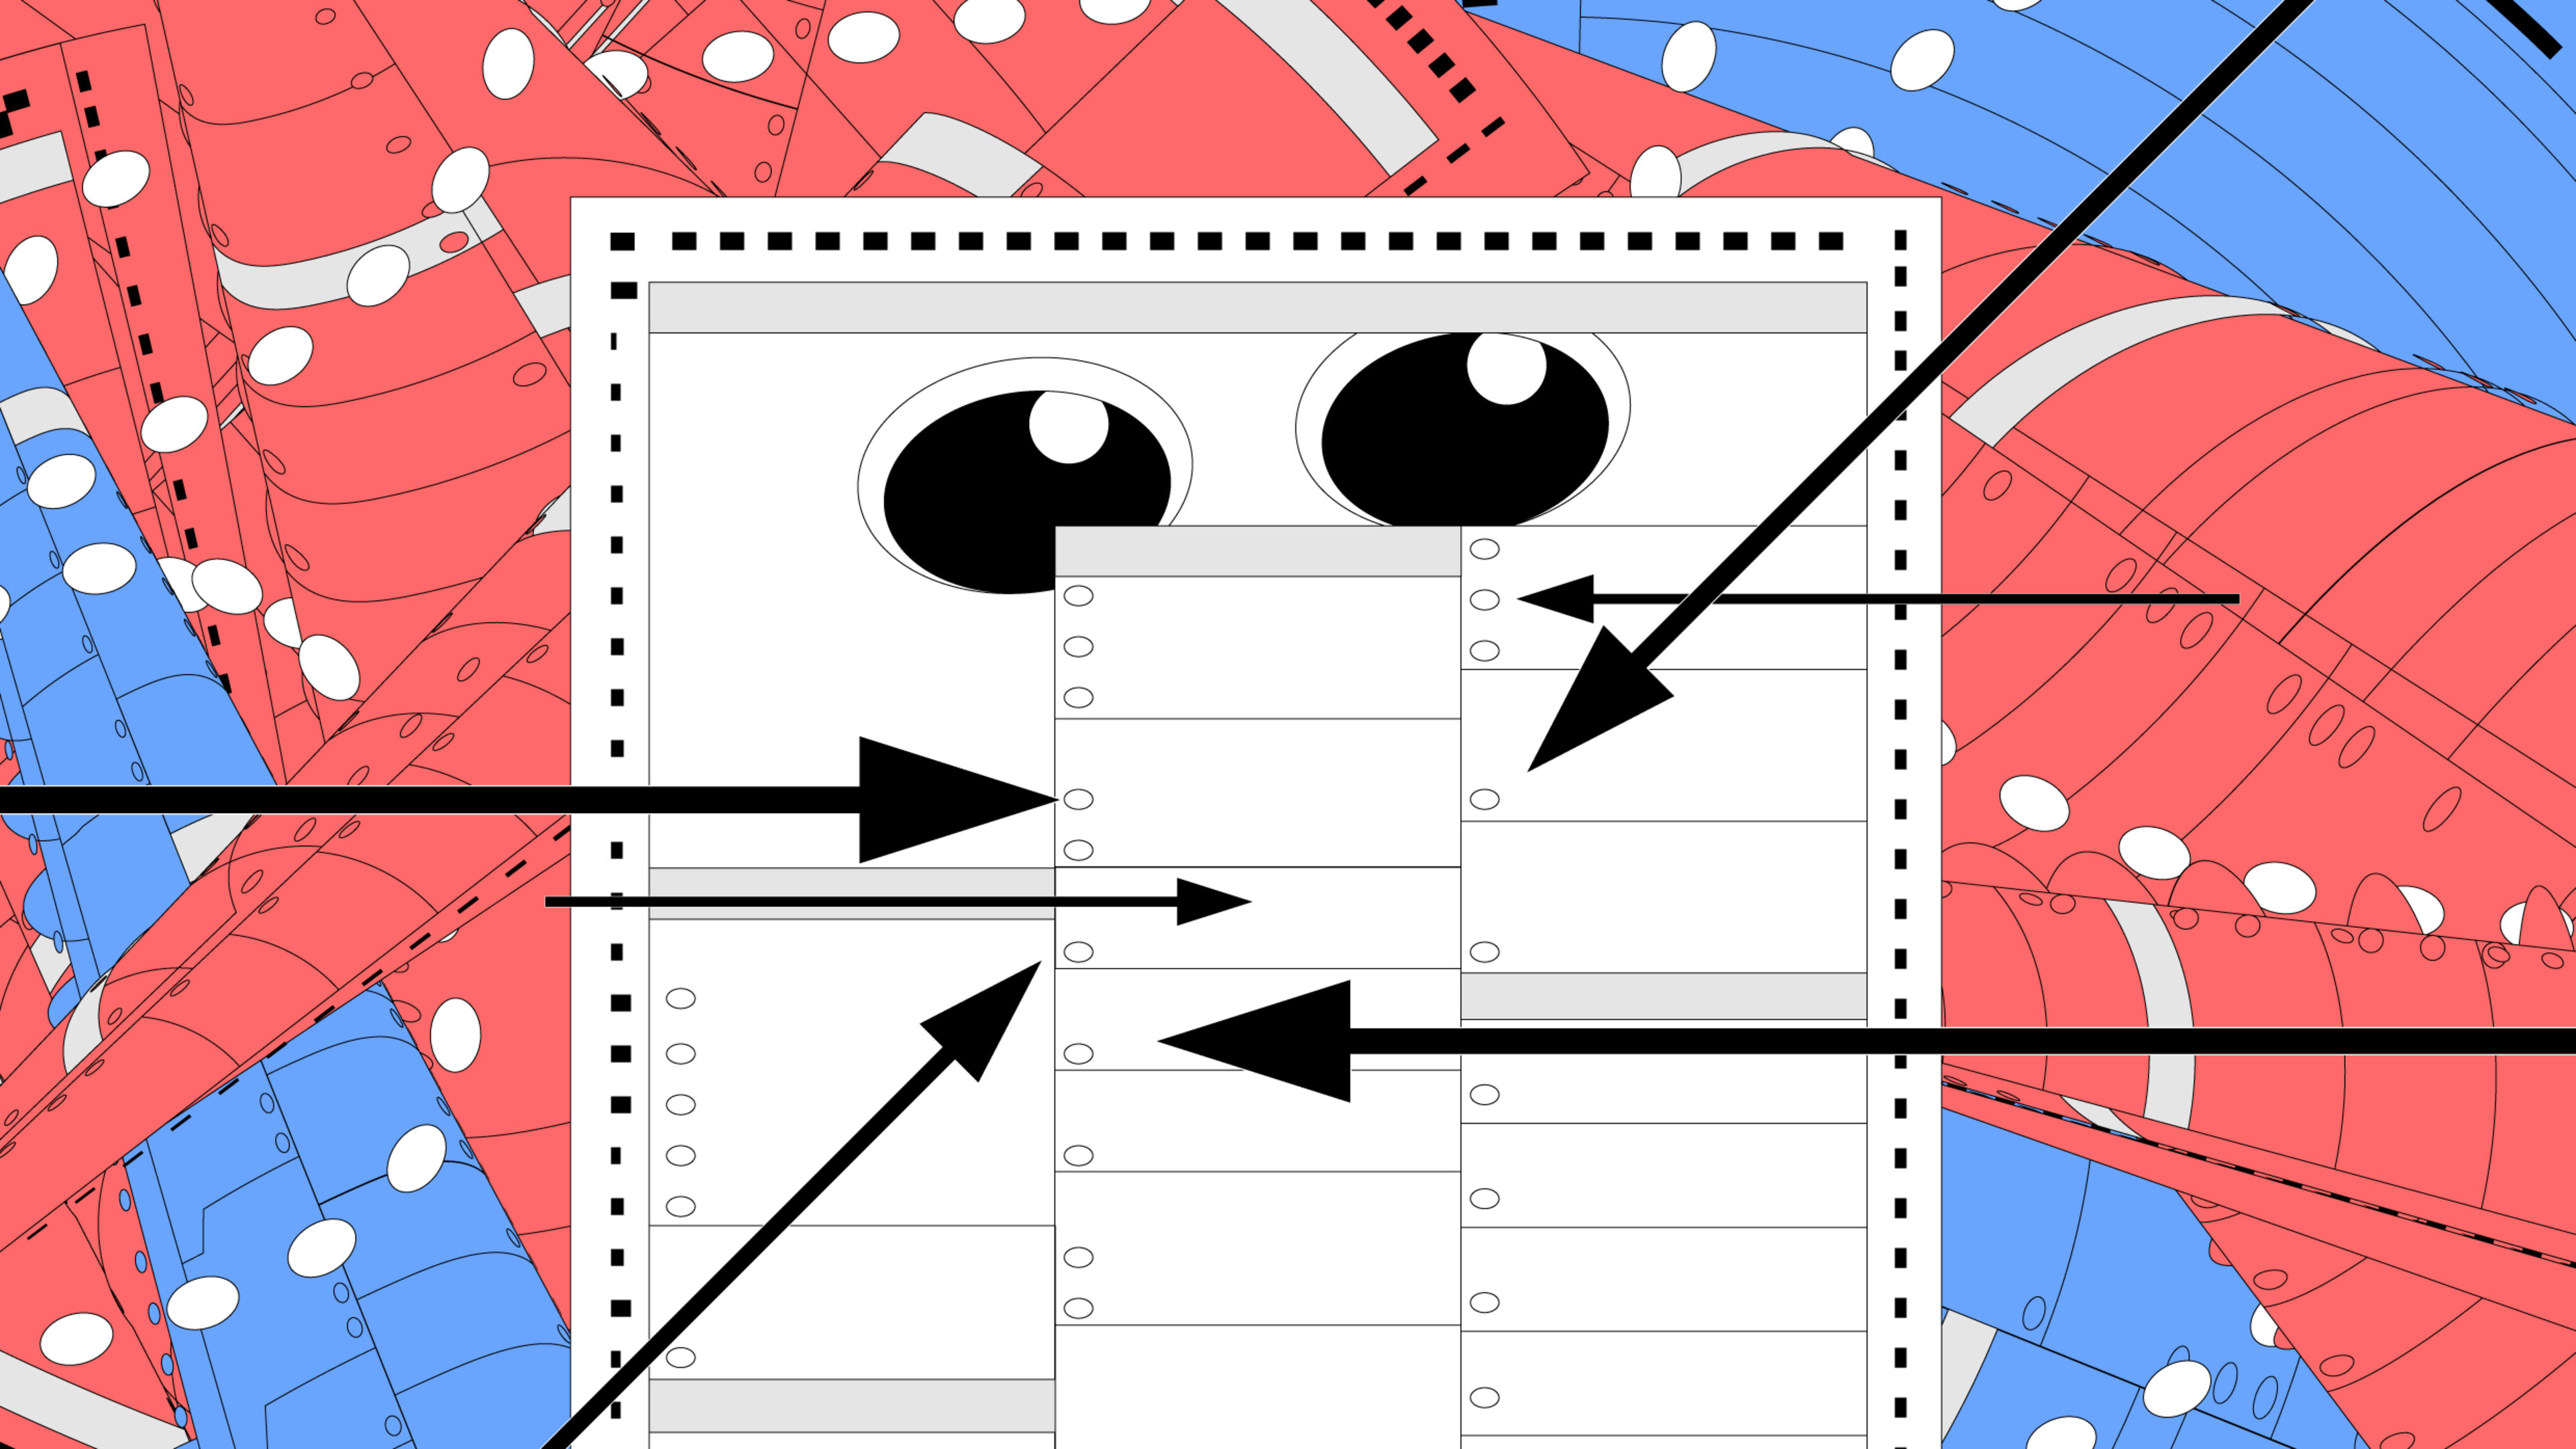 Ballots are inexplicably confusing. Here are 4 tips for filling yours out correctly